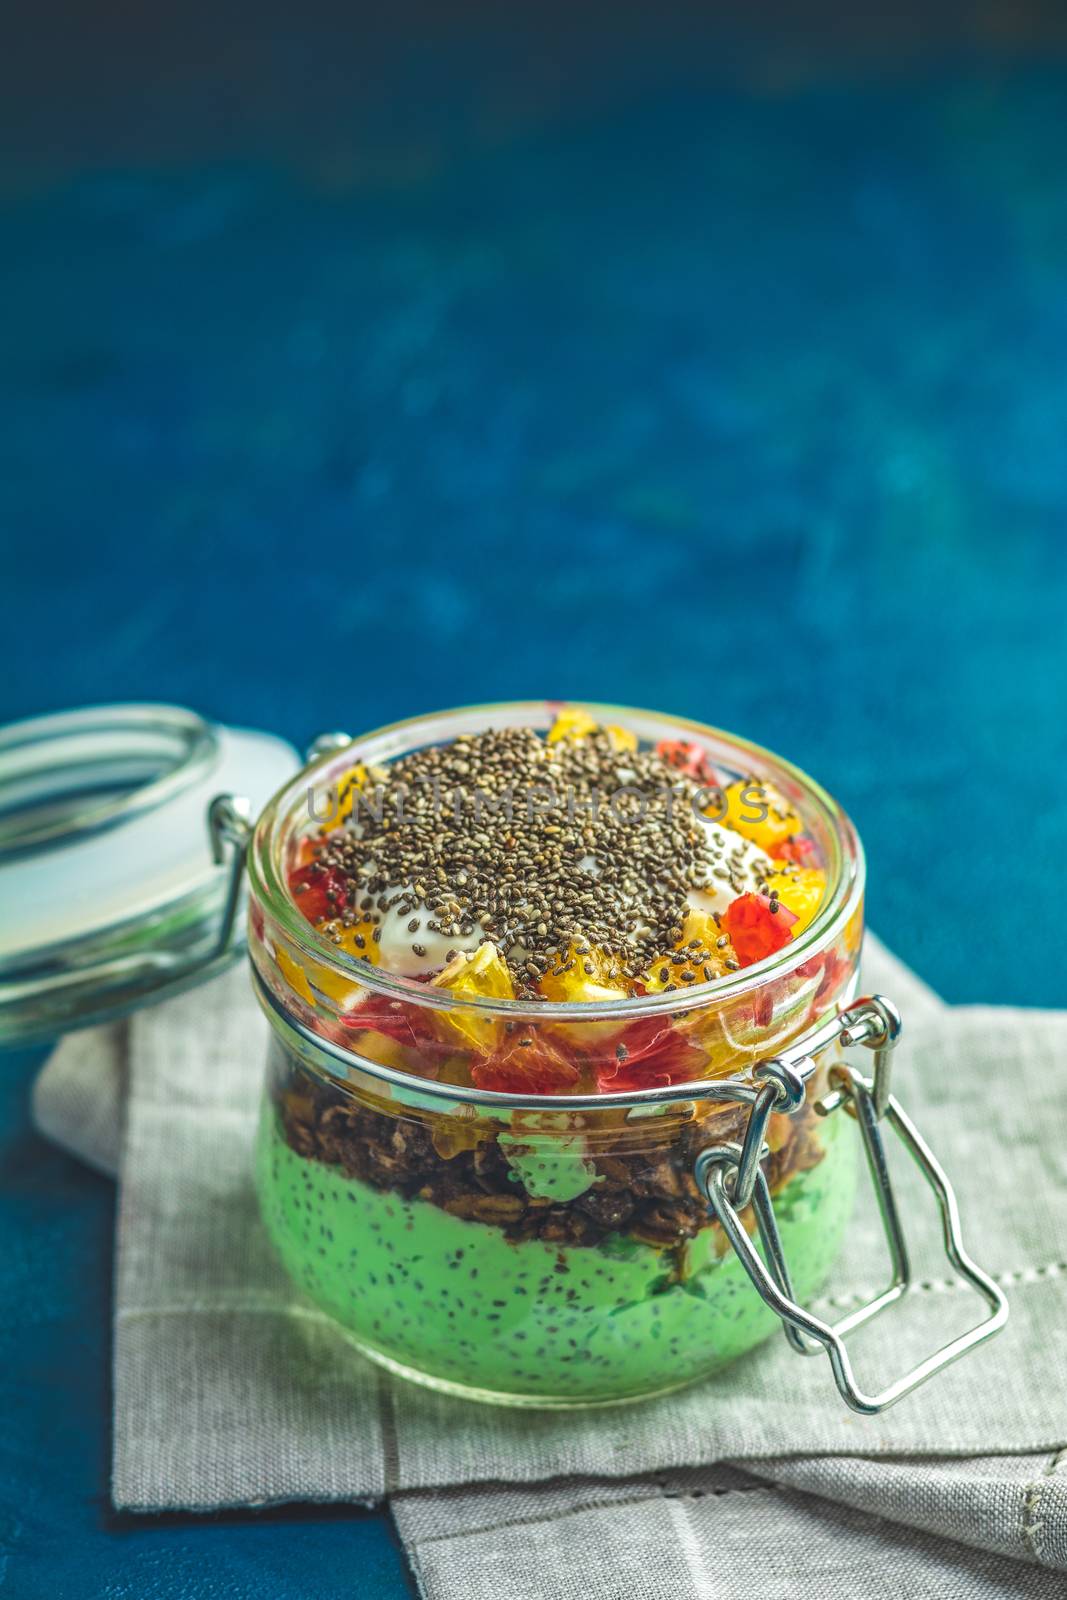 Chia seed pudding with matcha green tea by ArtSvitlyna